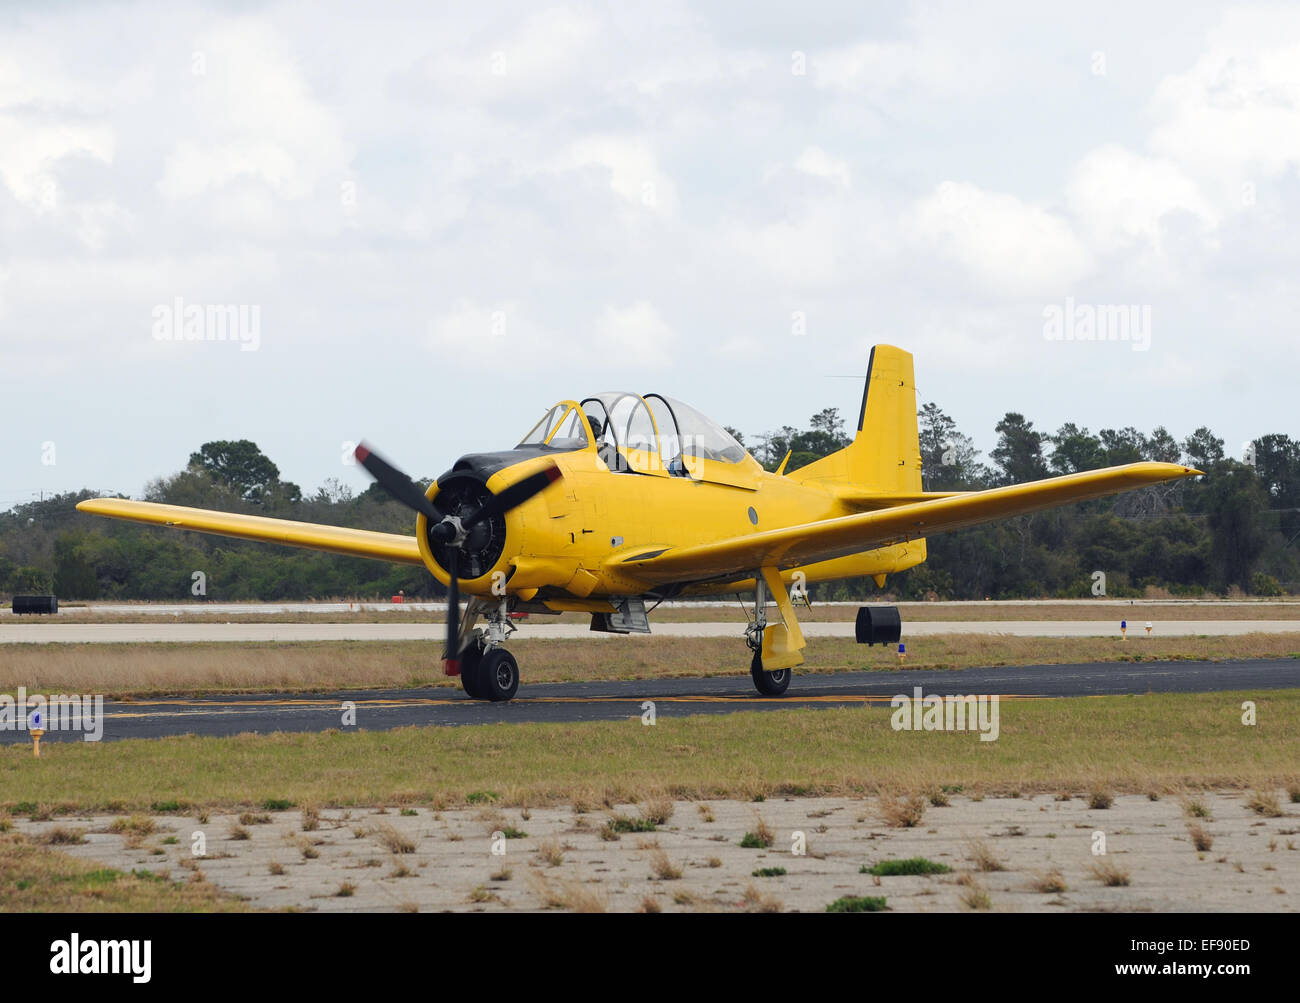 Vintage yellow airplane taxiing on the ground Stock Photo